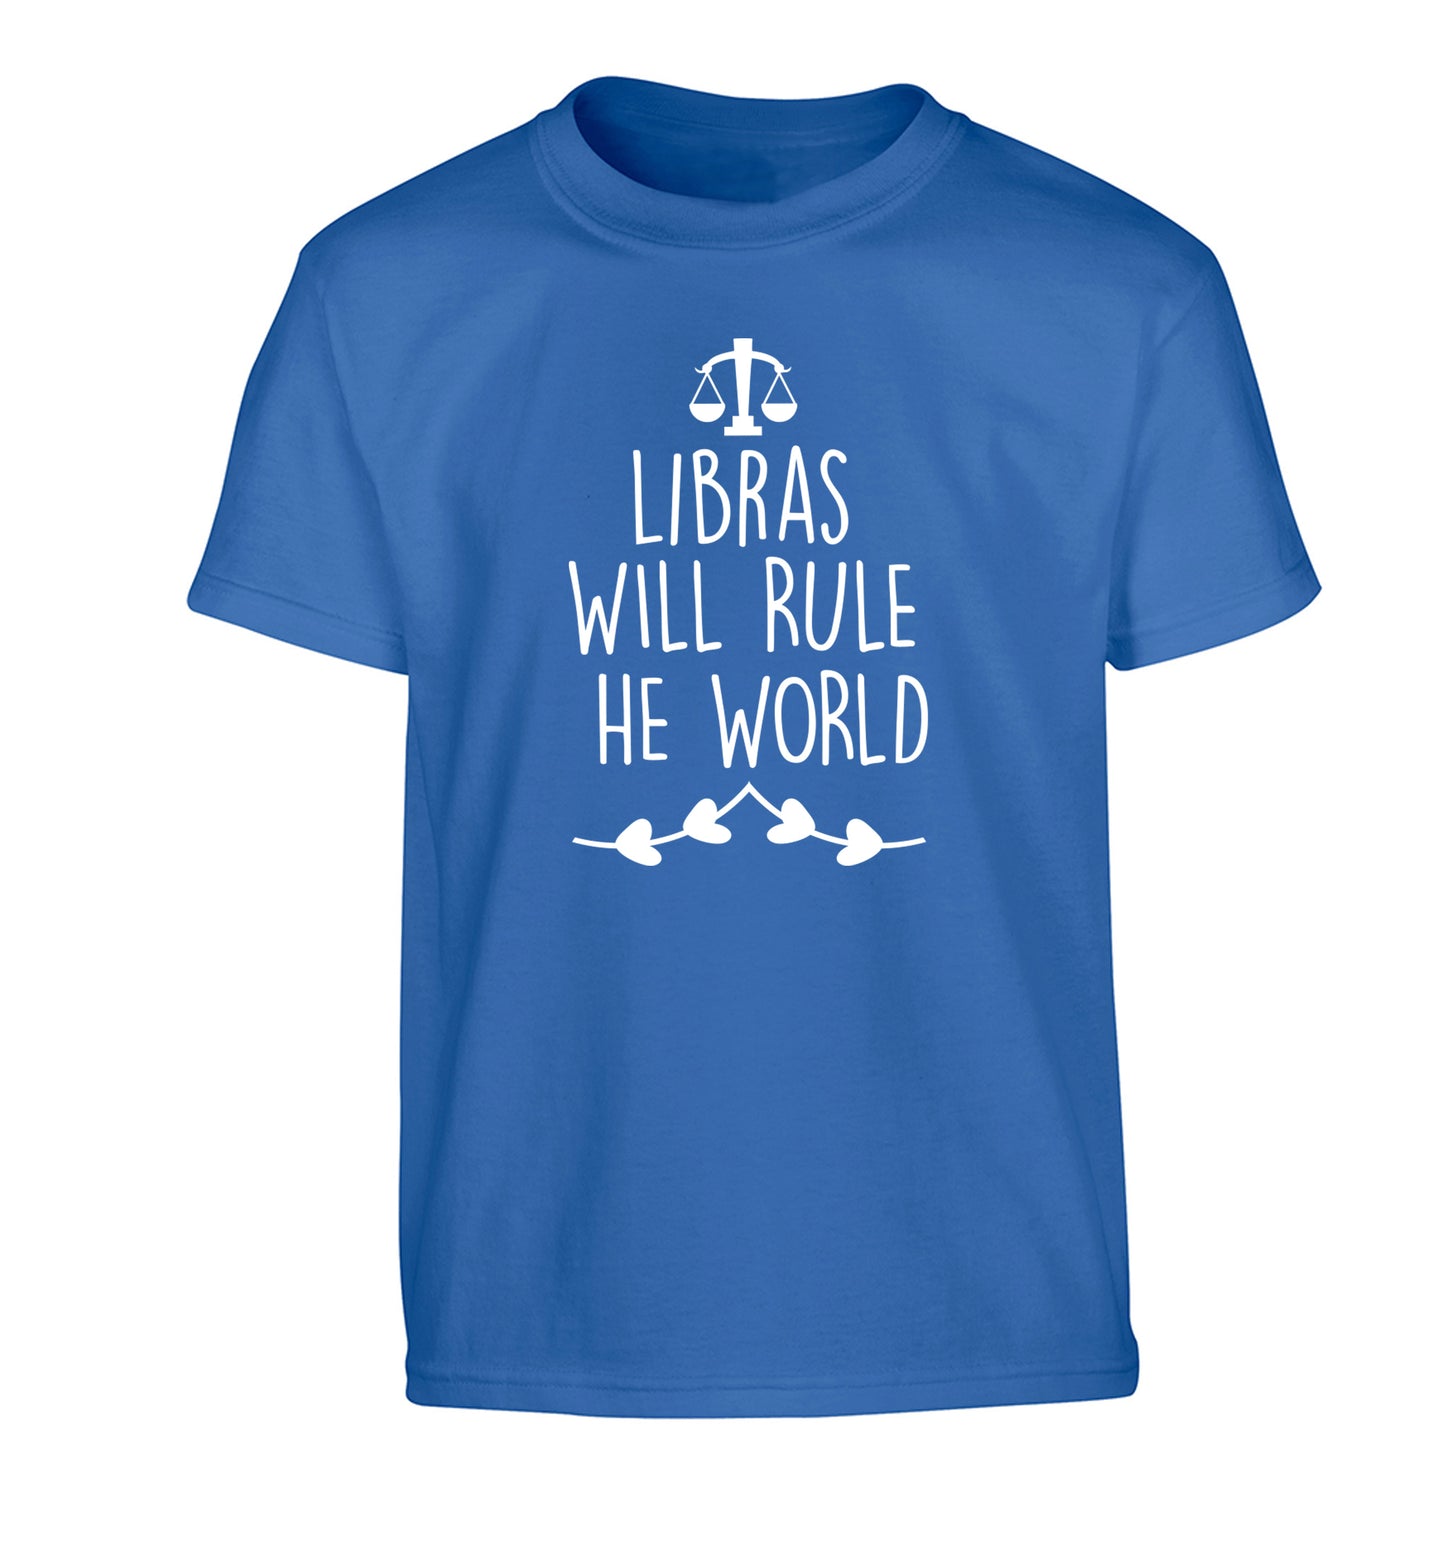 Libras will rule the world Children's blue Tshirt 12-13 Years